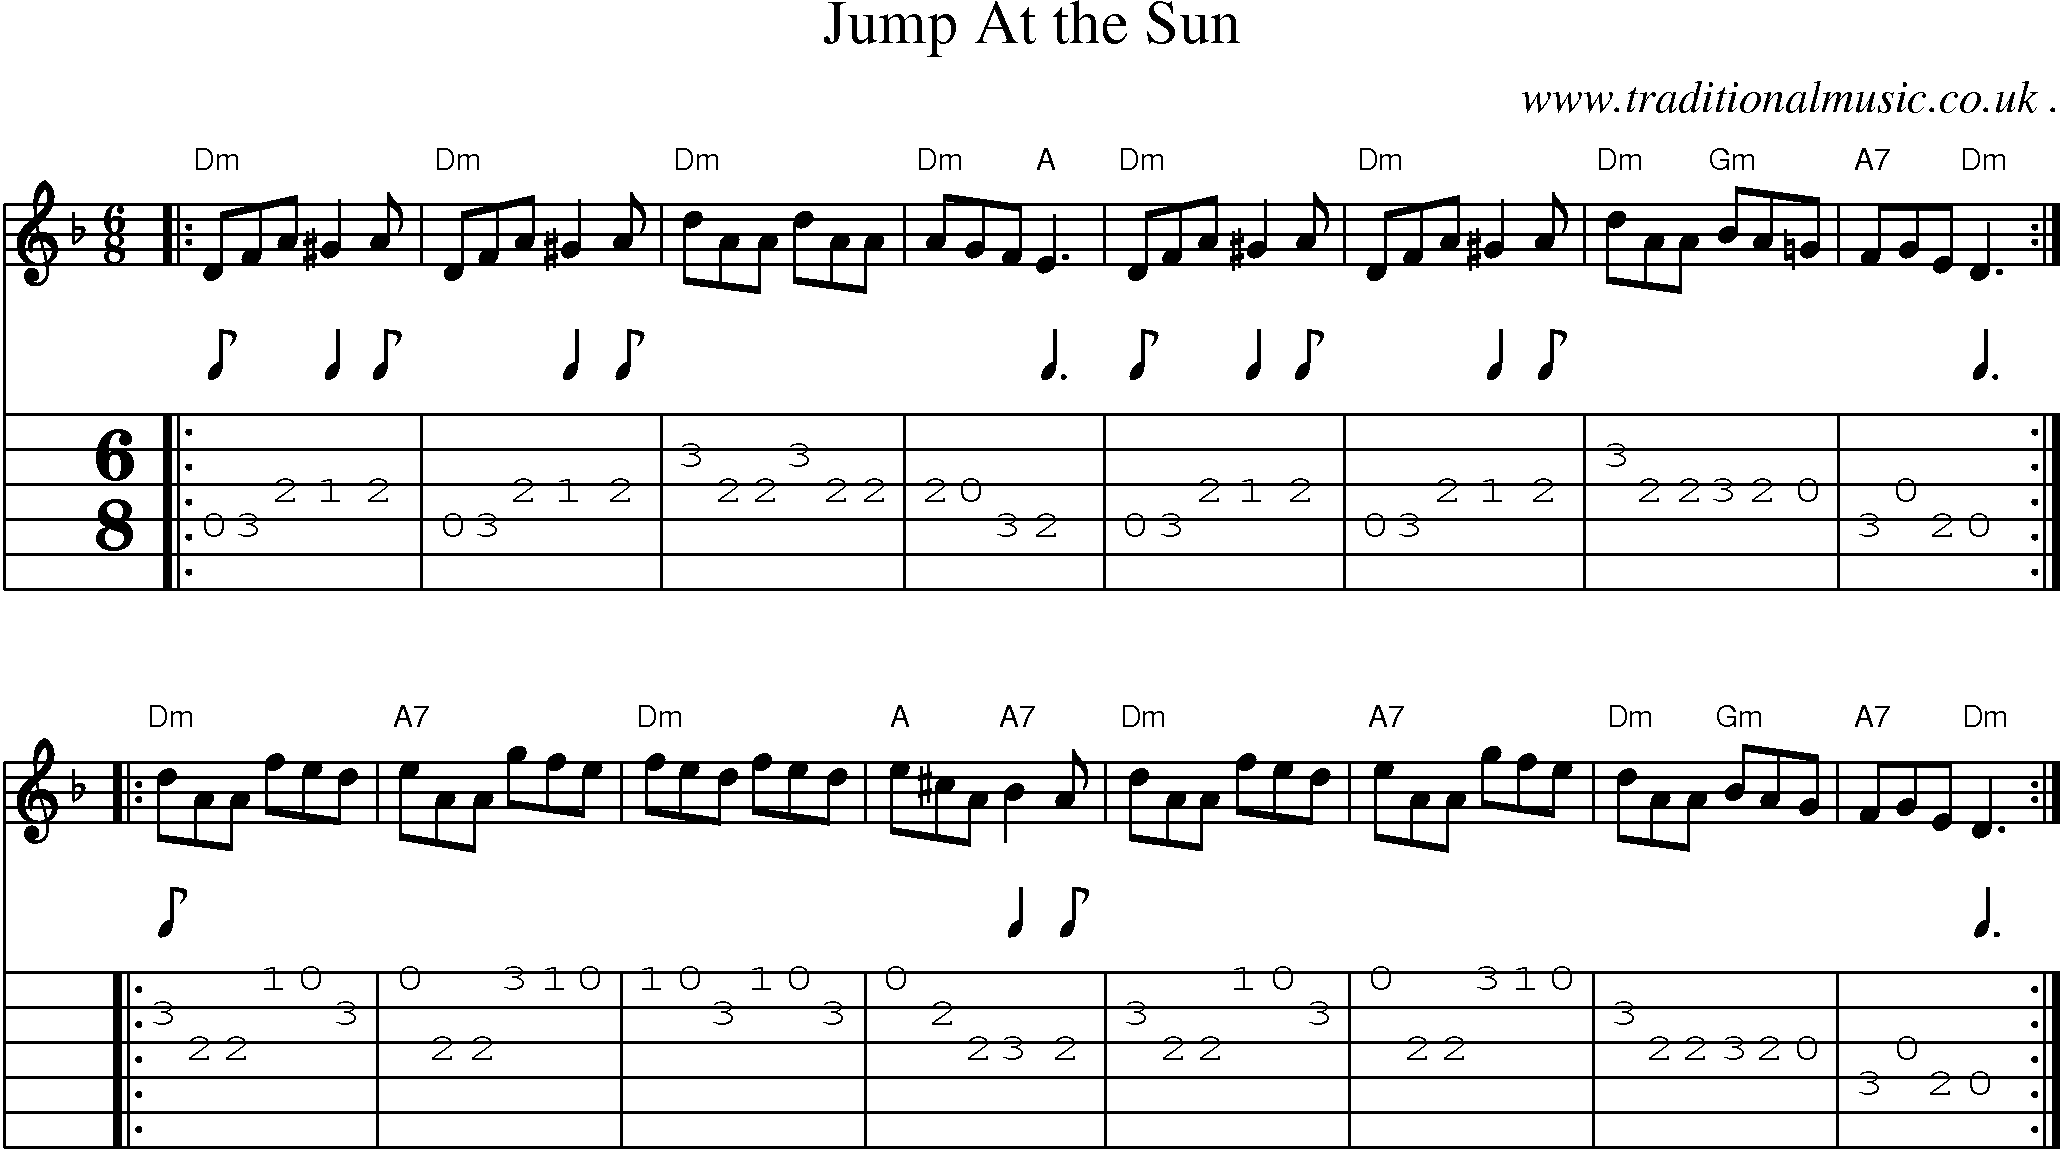 Sheet-music  score, Chords and Guitar Tabs for Jump At The Sun